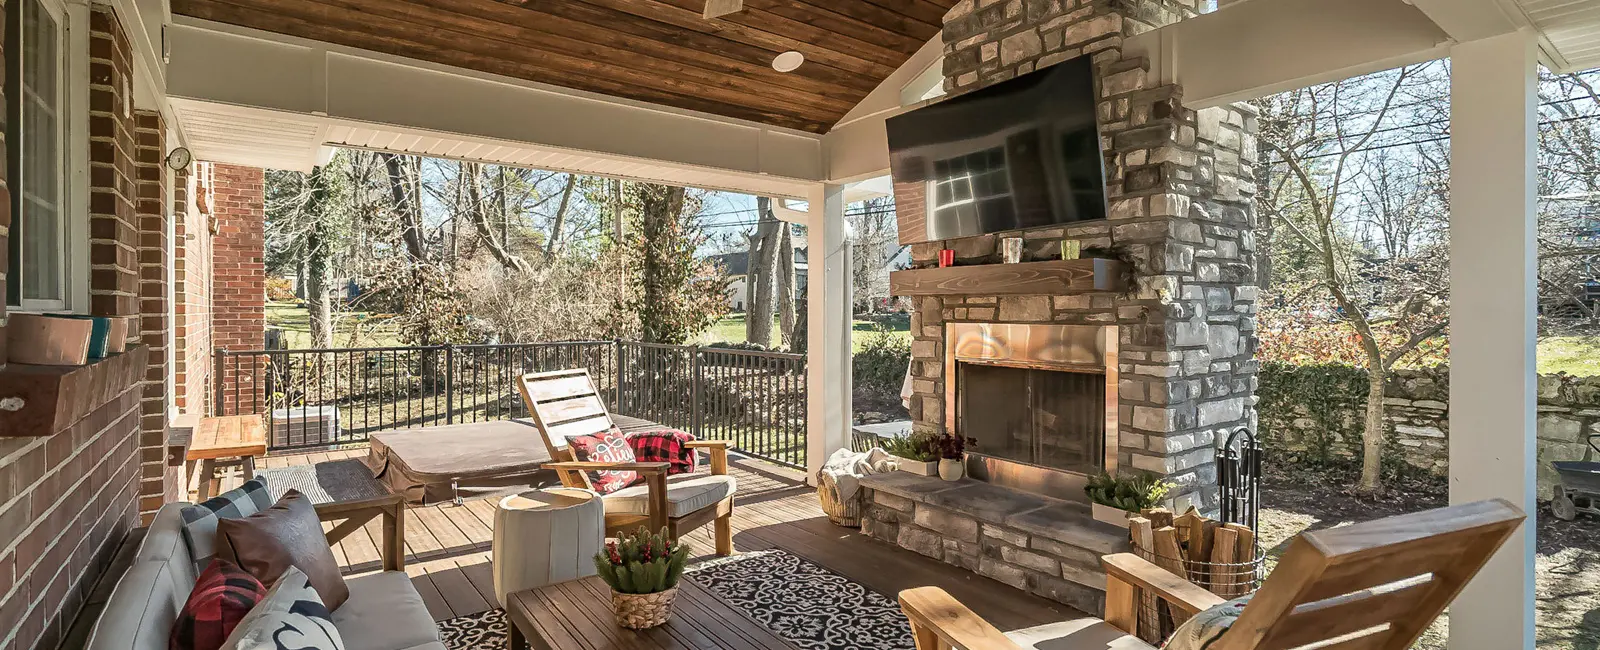 Photo of an outdoor living space with fireplace in St. Louis